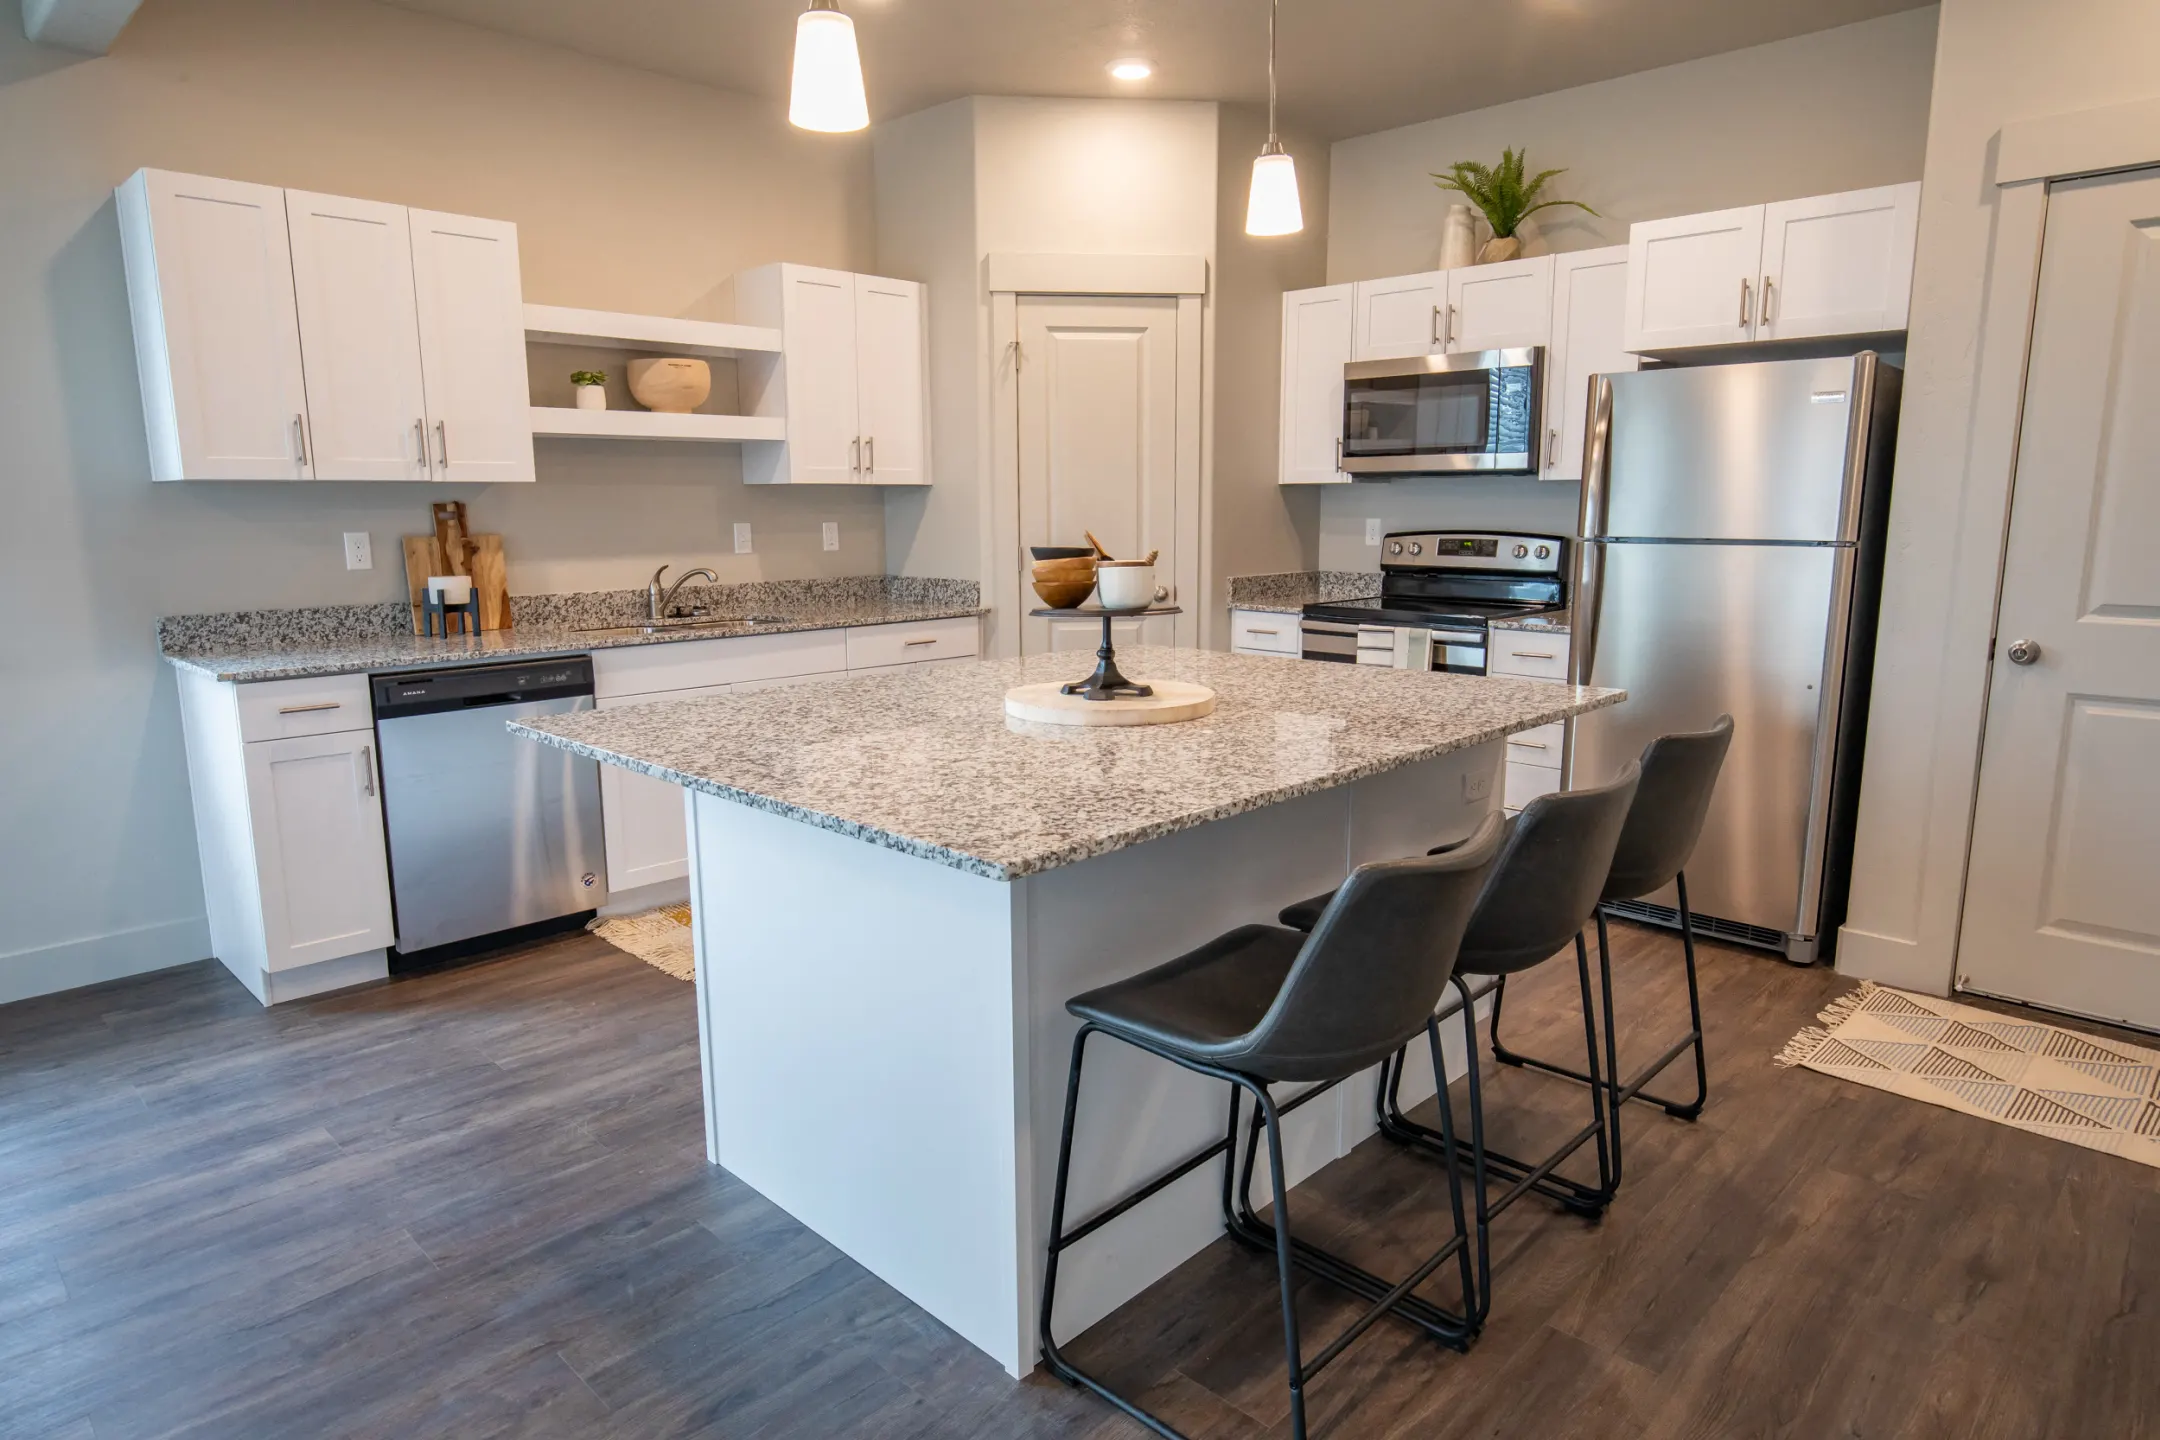 Kitchen - Haven Cove Townhomes - West Haven, UT